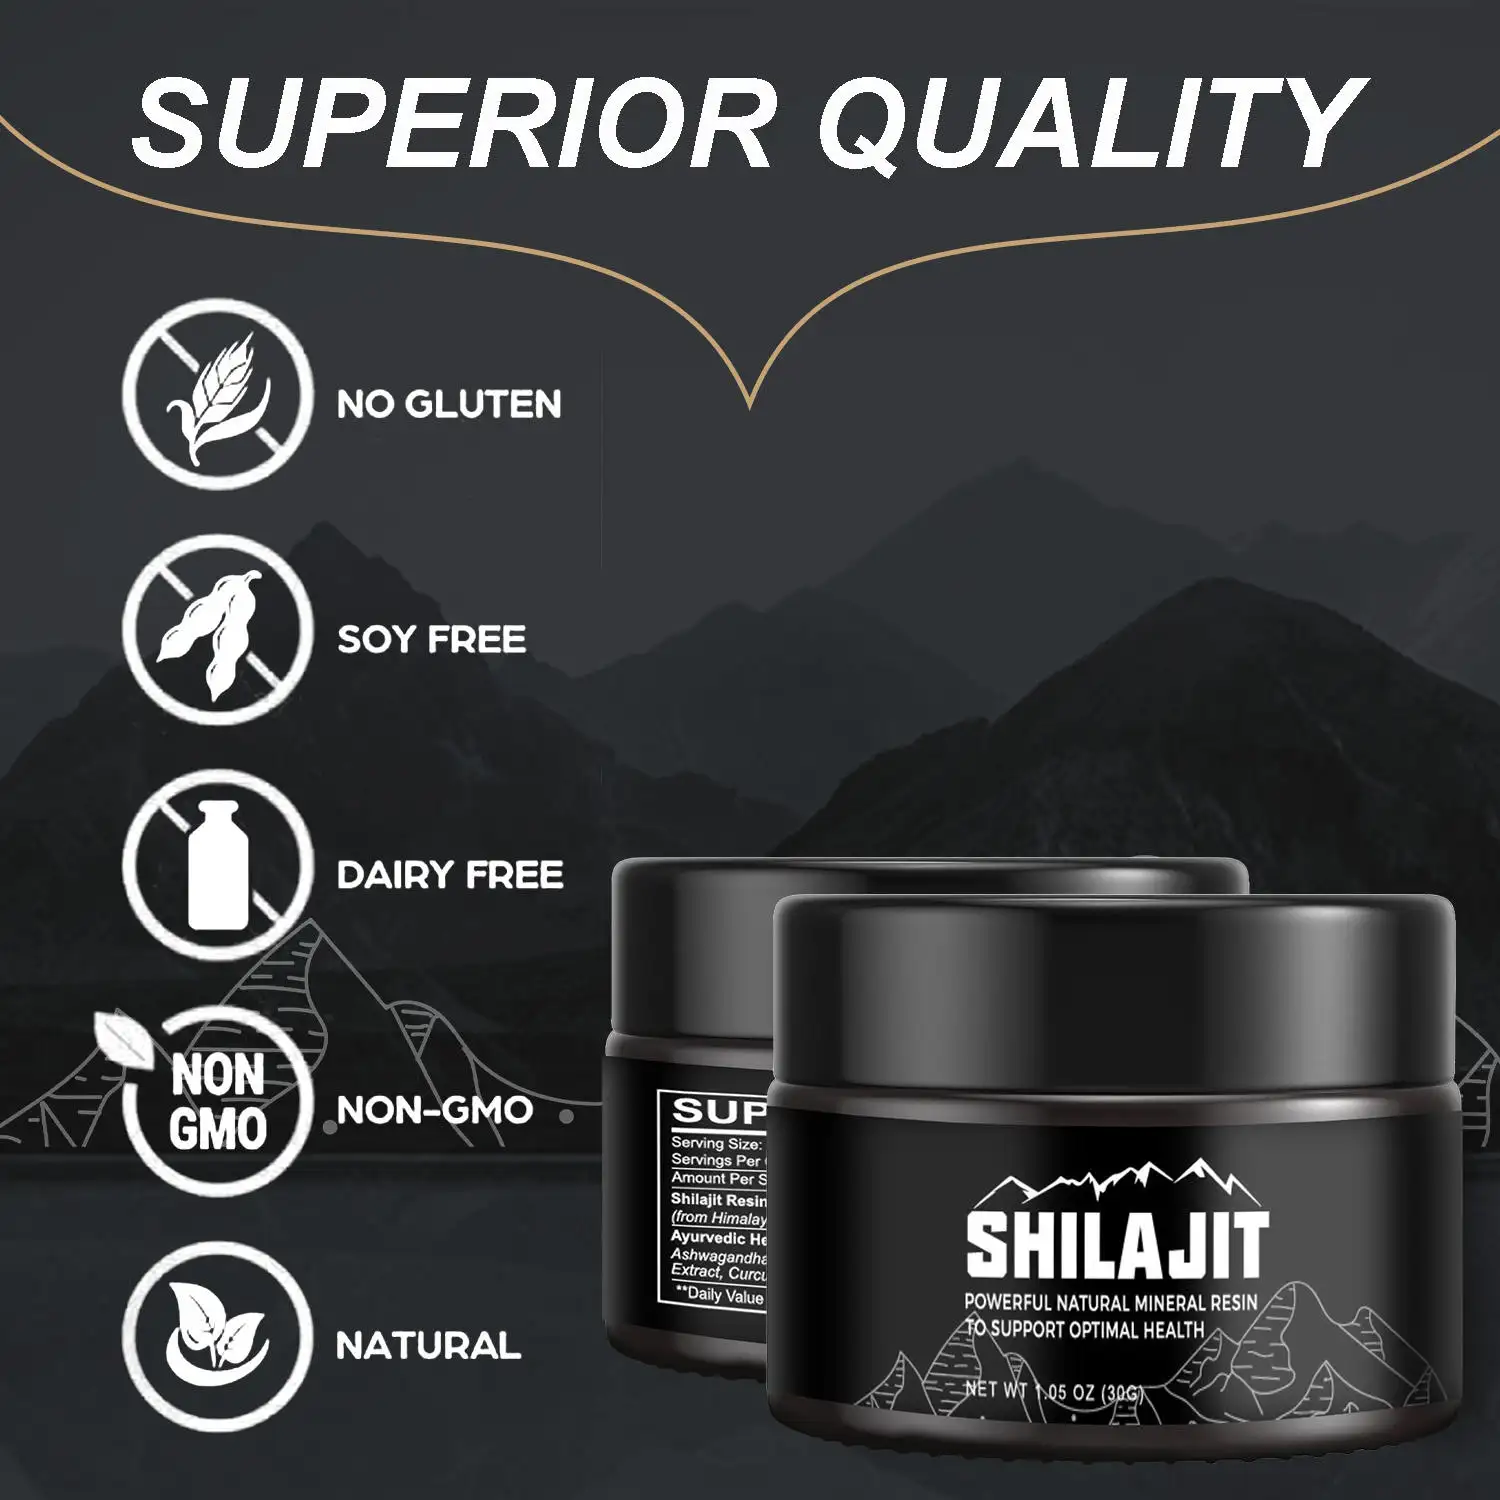 Oem Packing Dietary Supplement Rich In Vitamins Minerals Original Shilajit Extract Shilajit Products